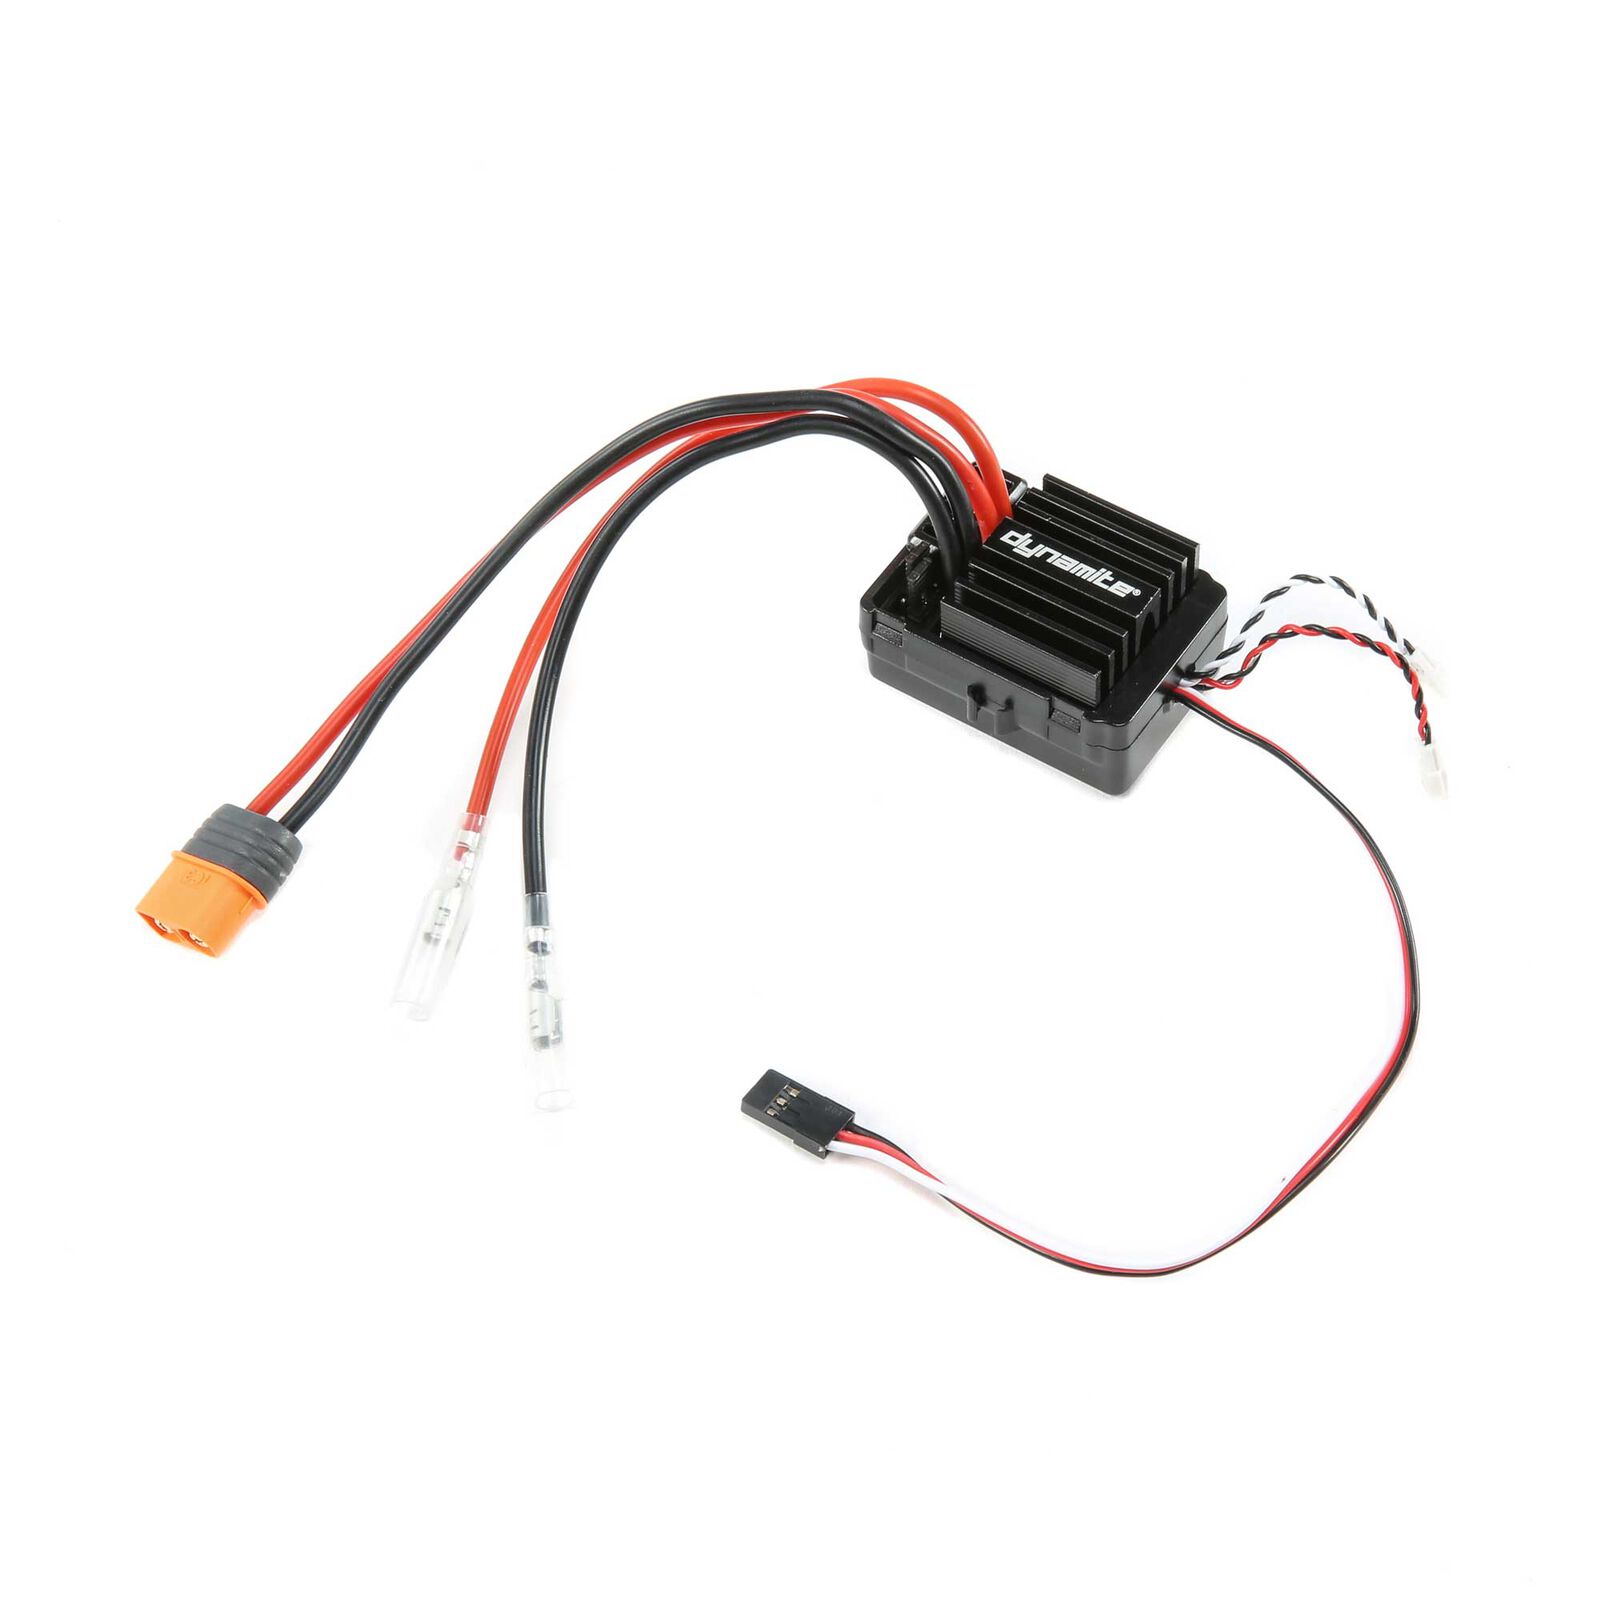 Waterproof AE-5L Brushed ESC with LED Port Light and IC3